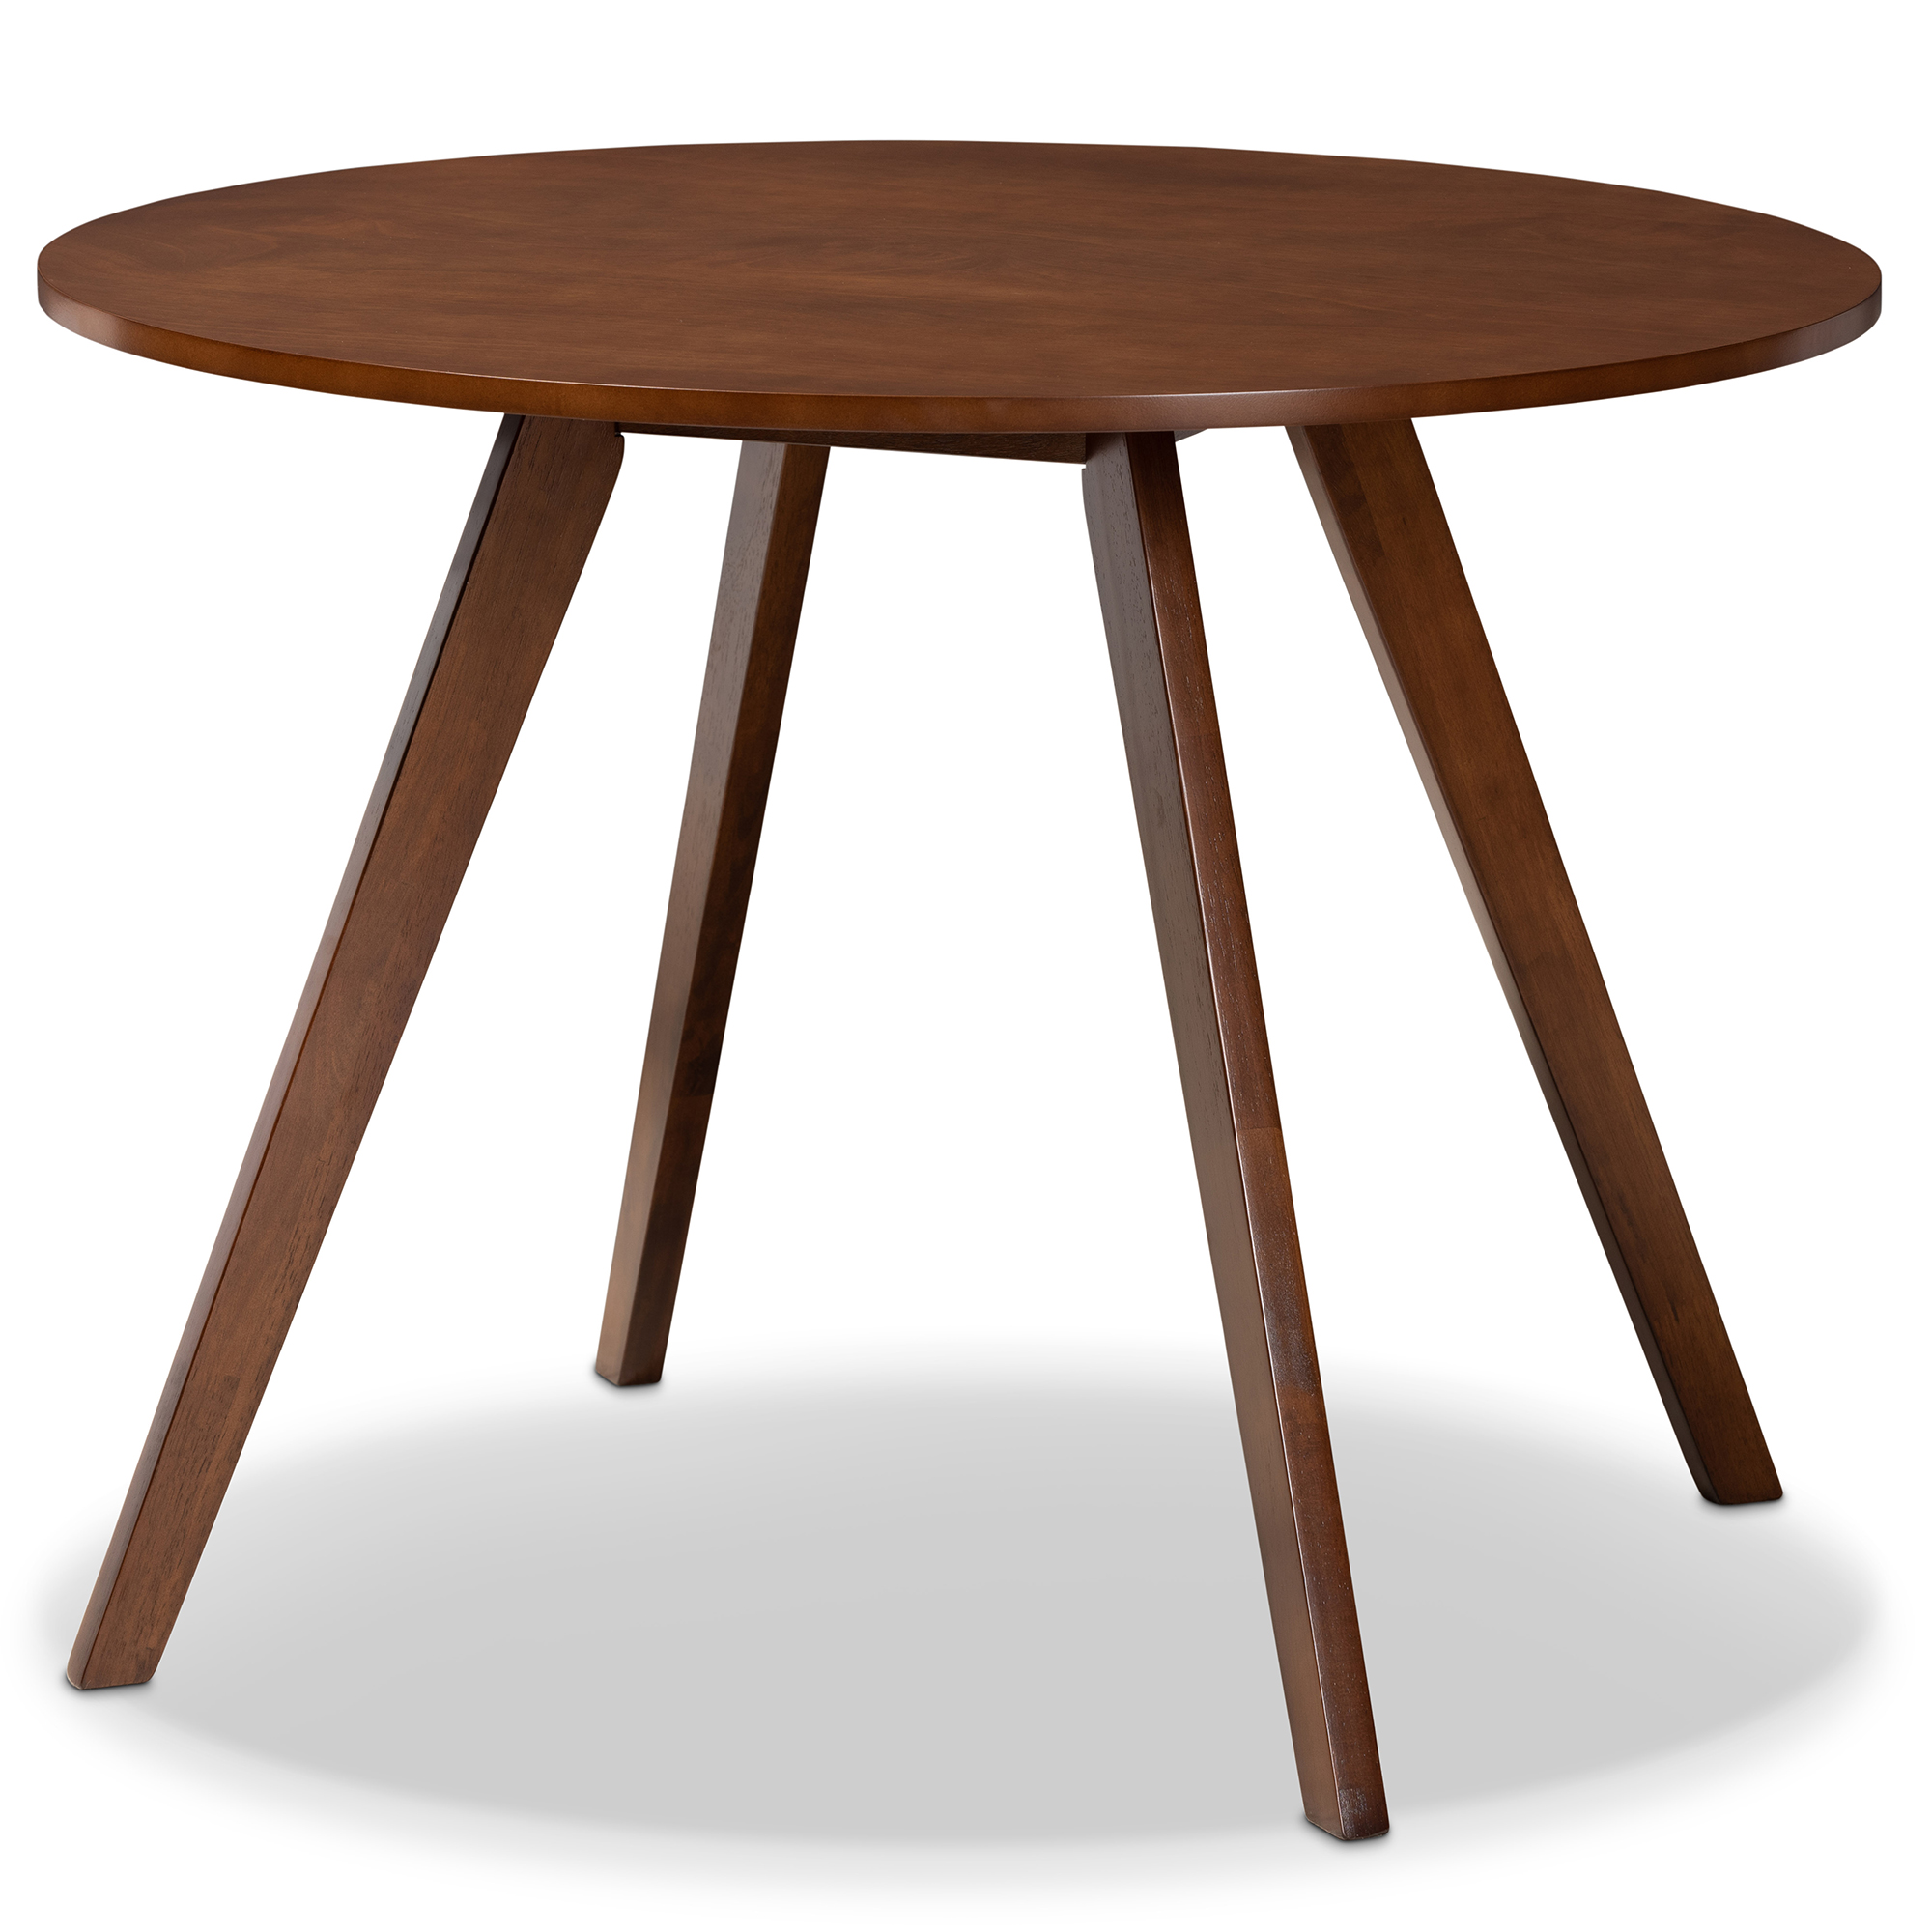 WoW | Mid-Century Design Dining Tables by Alana | Enhance Your Living Space